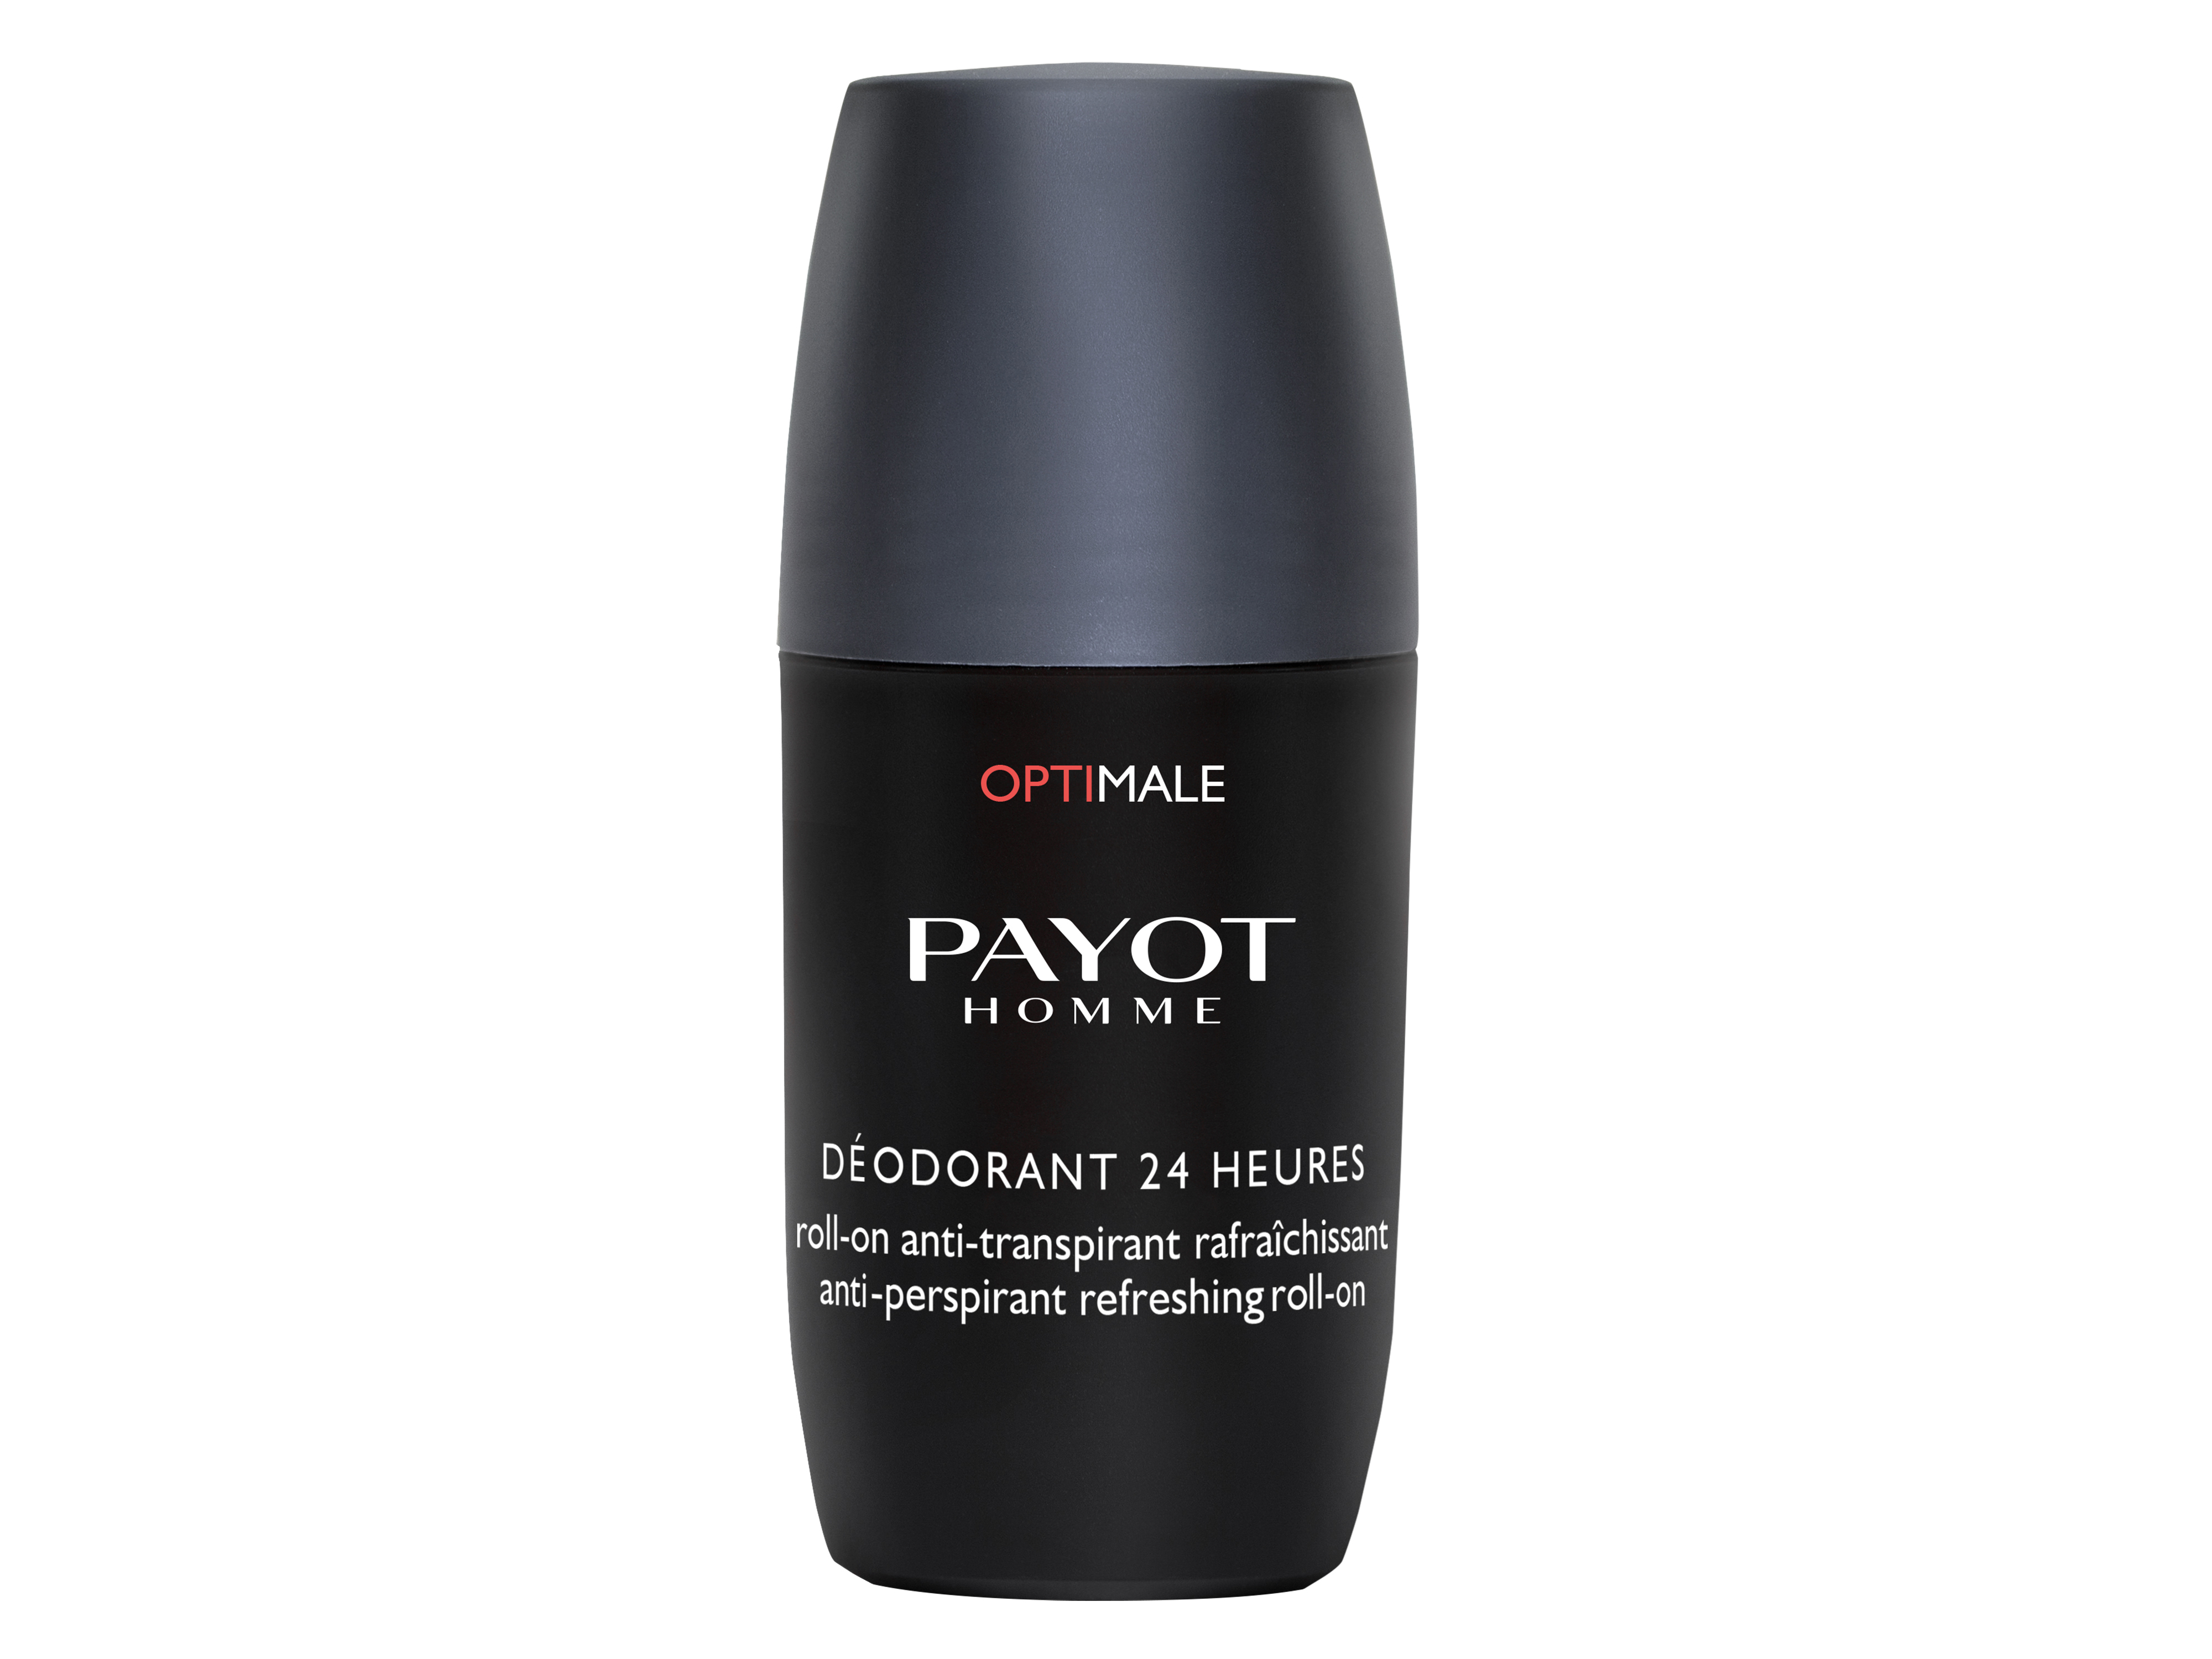 Payot Homme Optimale Deodorant 24 Heures, 75 ml